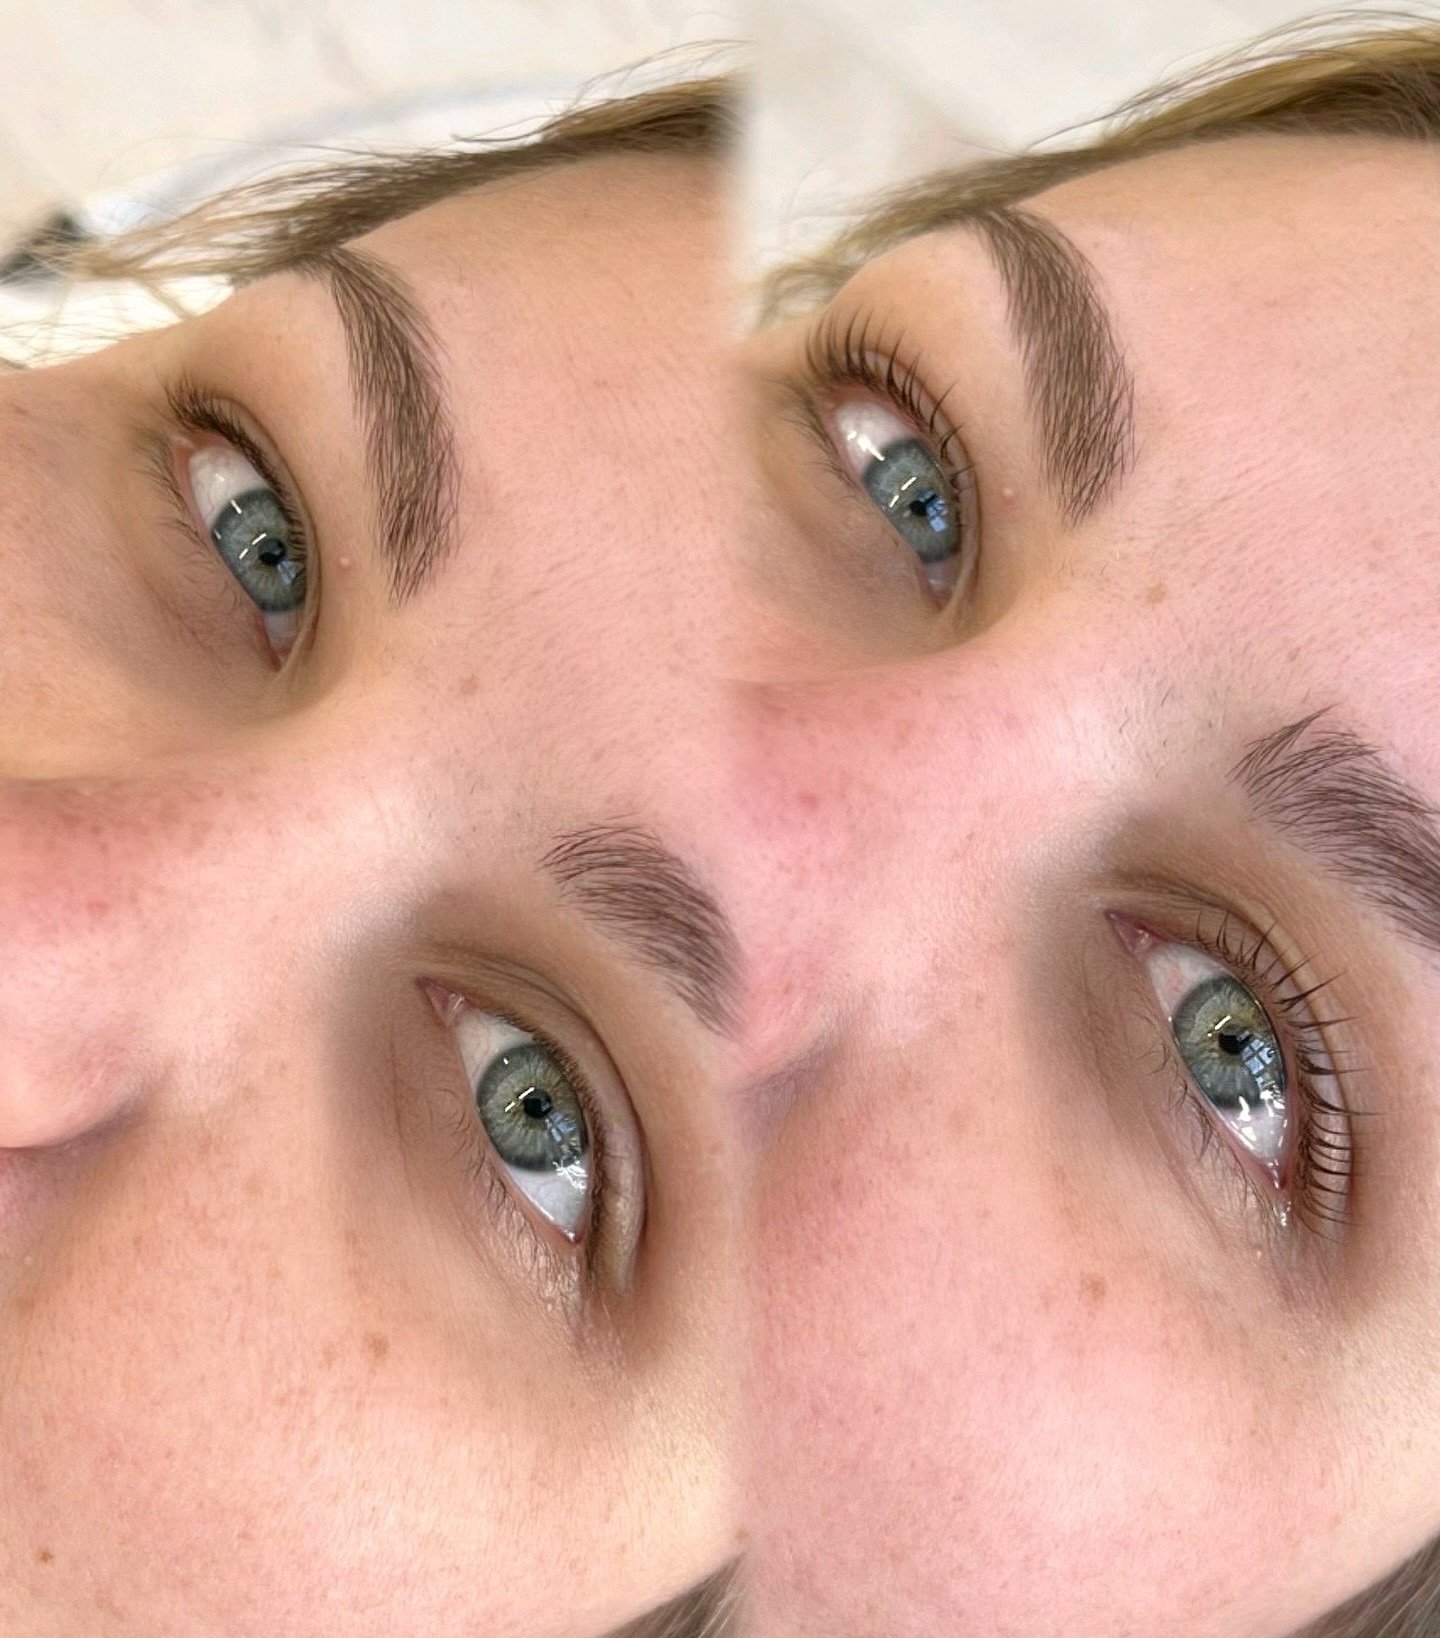 LASH LIFT NO TINT ADDED 🤩💪🏼 What a difference!!

#microblade #microblading #brows #eyebrows #microbladedbrows #permanentmakeup #acnetreatment #pmu #beauty #microbladingeyebrows #powderbrows #facials #northwestskinandbrows #chemicalpeel #microblade